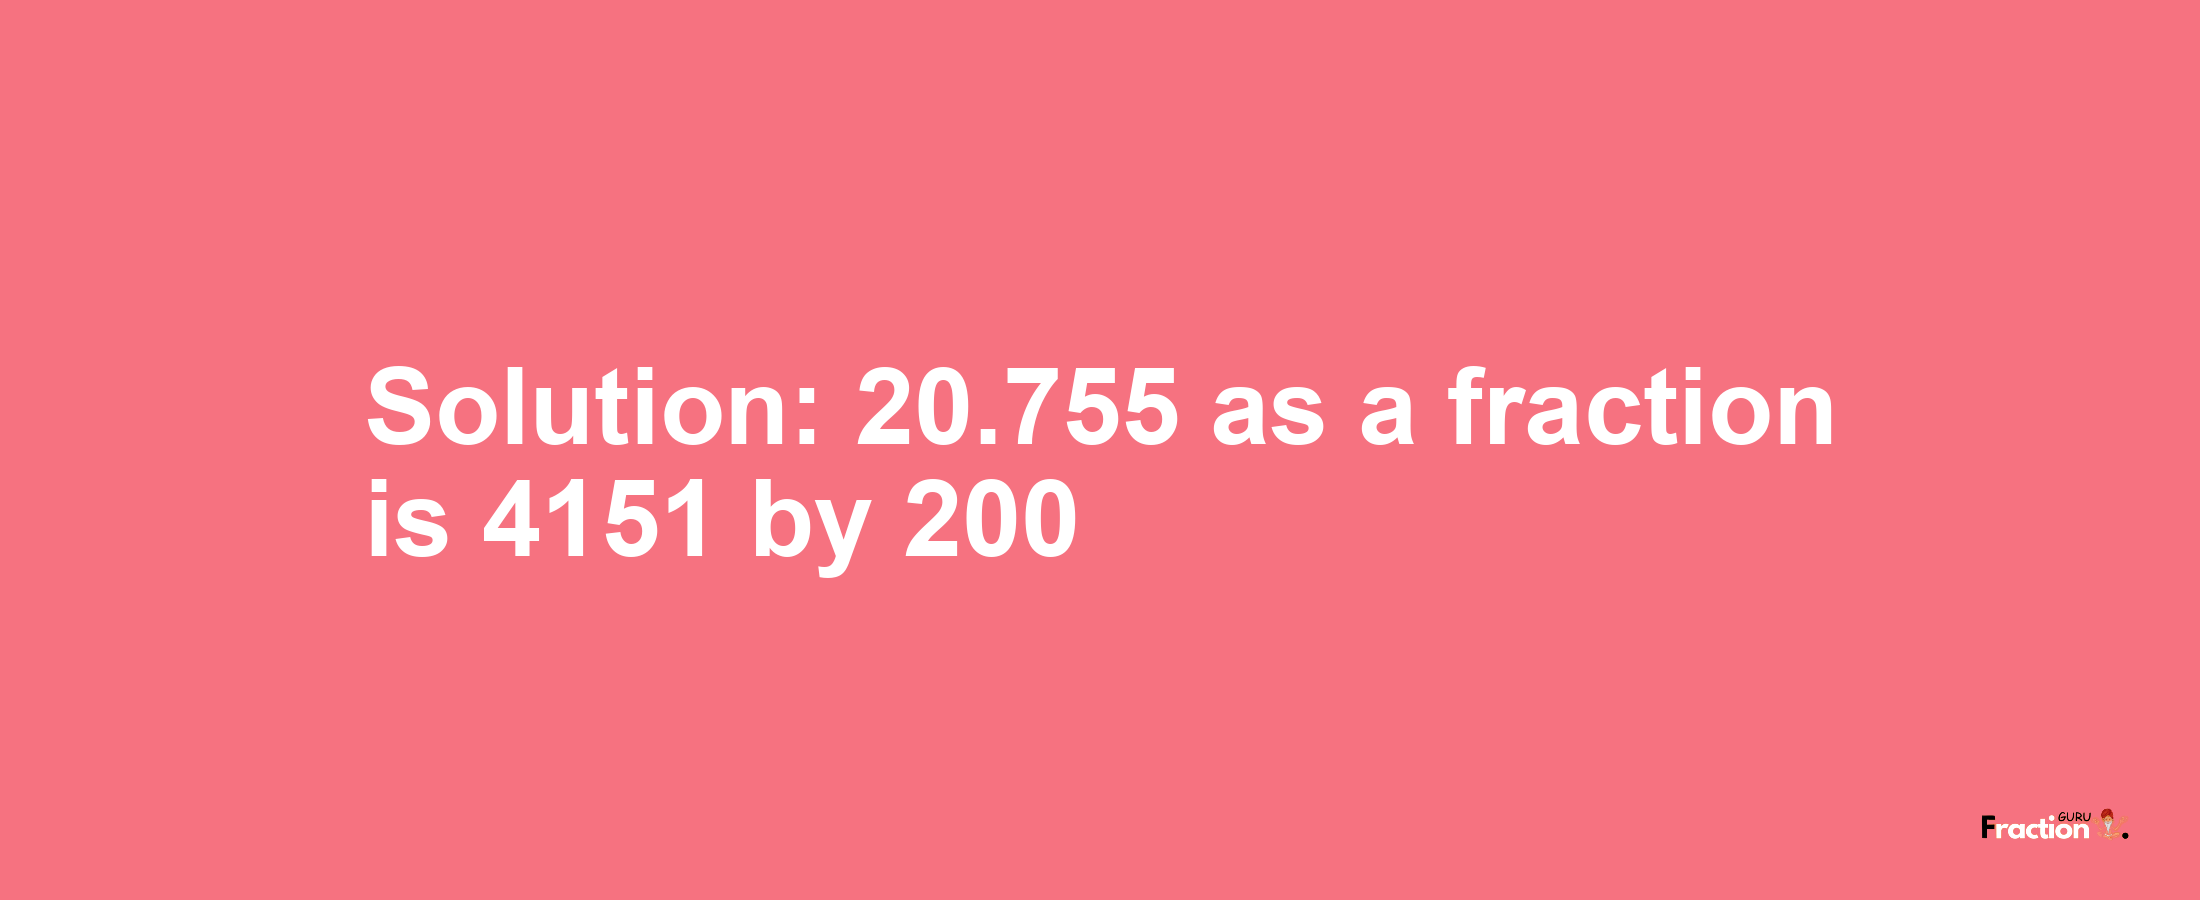 Solution:20.755 as a fraction is 4151/200